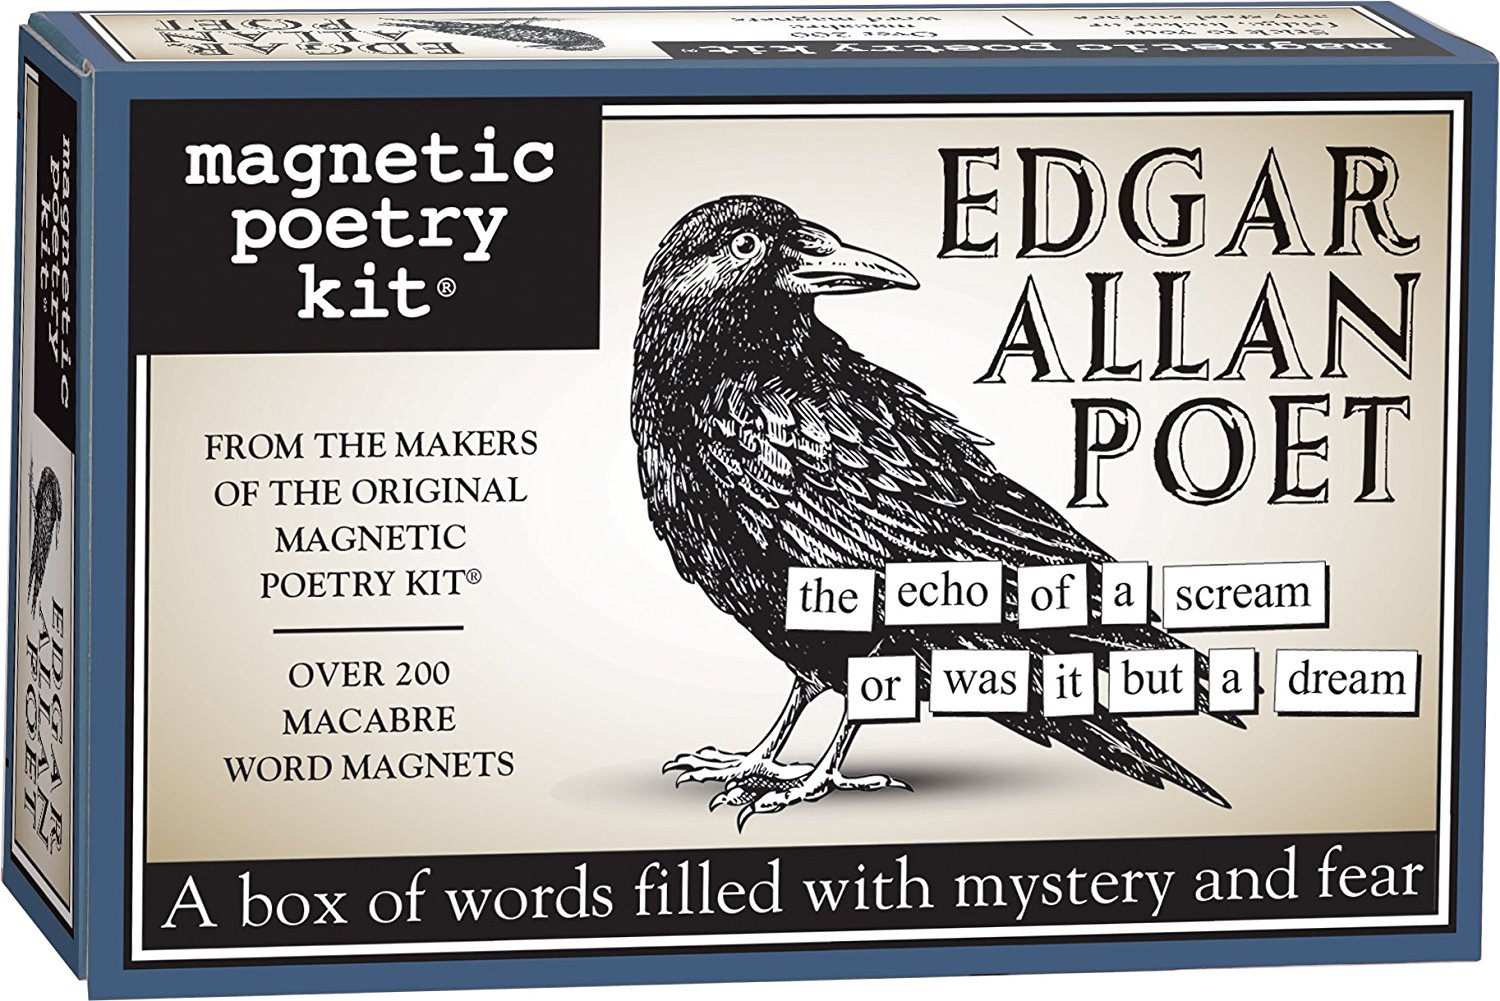 20 Macabre, Twisted, Unusual, Dark, Victorian, & Gothic Stocking Stuffers | Edgar Allan Poet Magnetic Poetry Kit | Poe | Christmas Shopping | www.MeandAnnabelLee.com